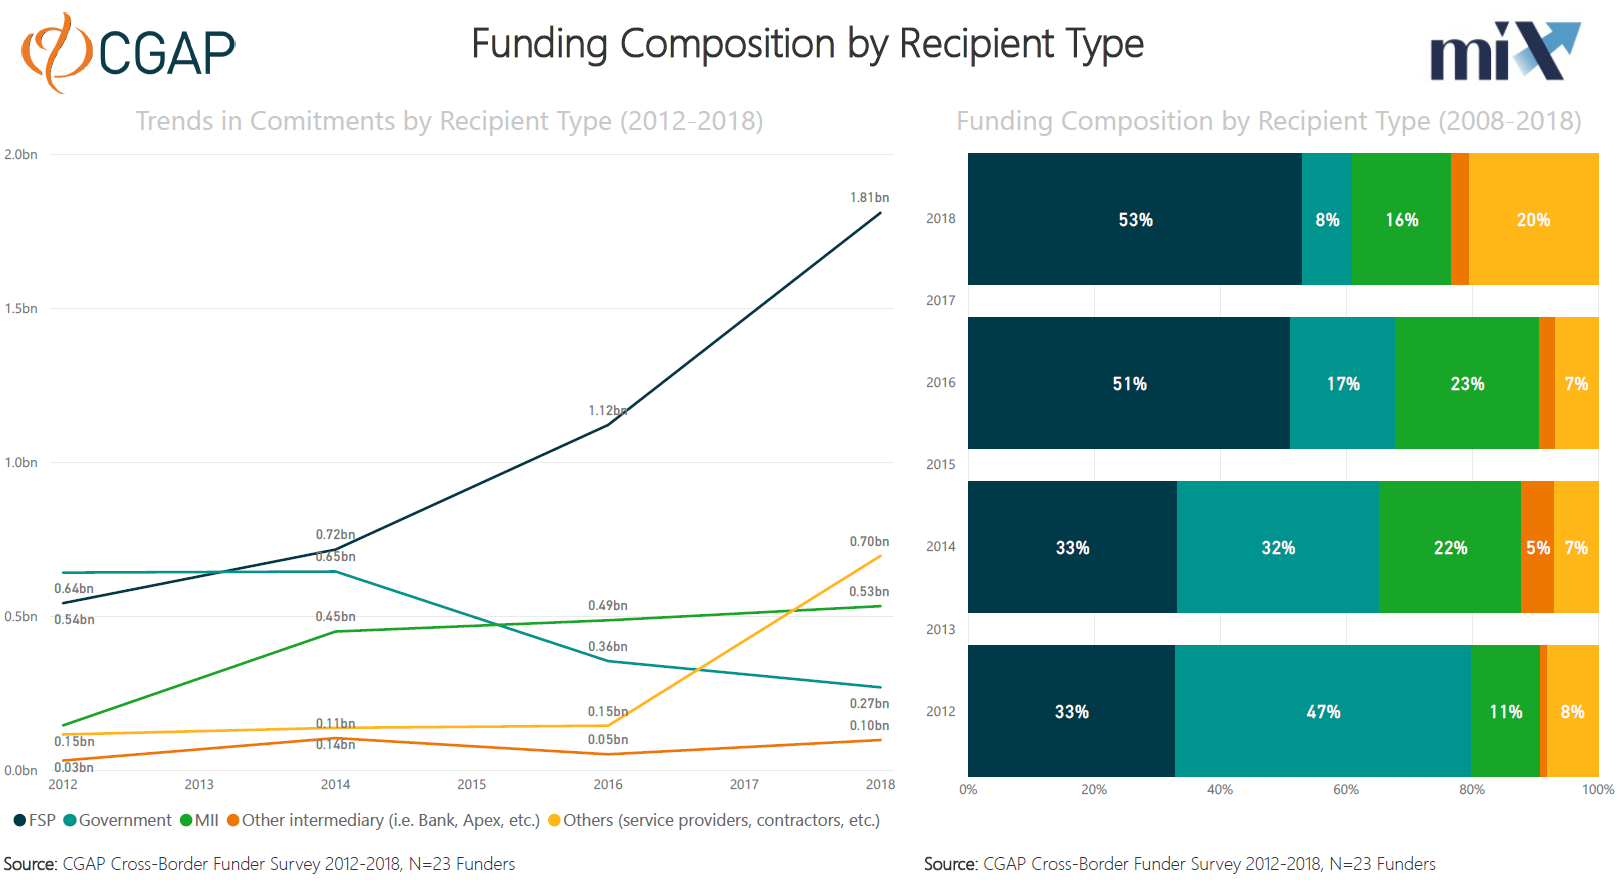 Who do funders fund in Middle East and North Africa? (Recipients)